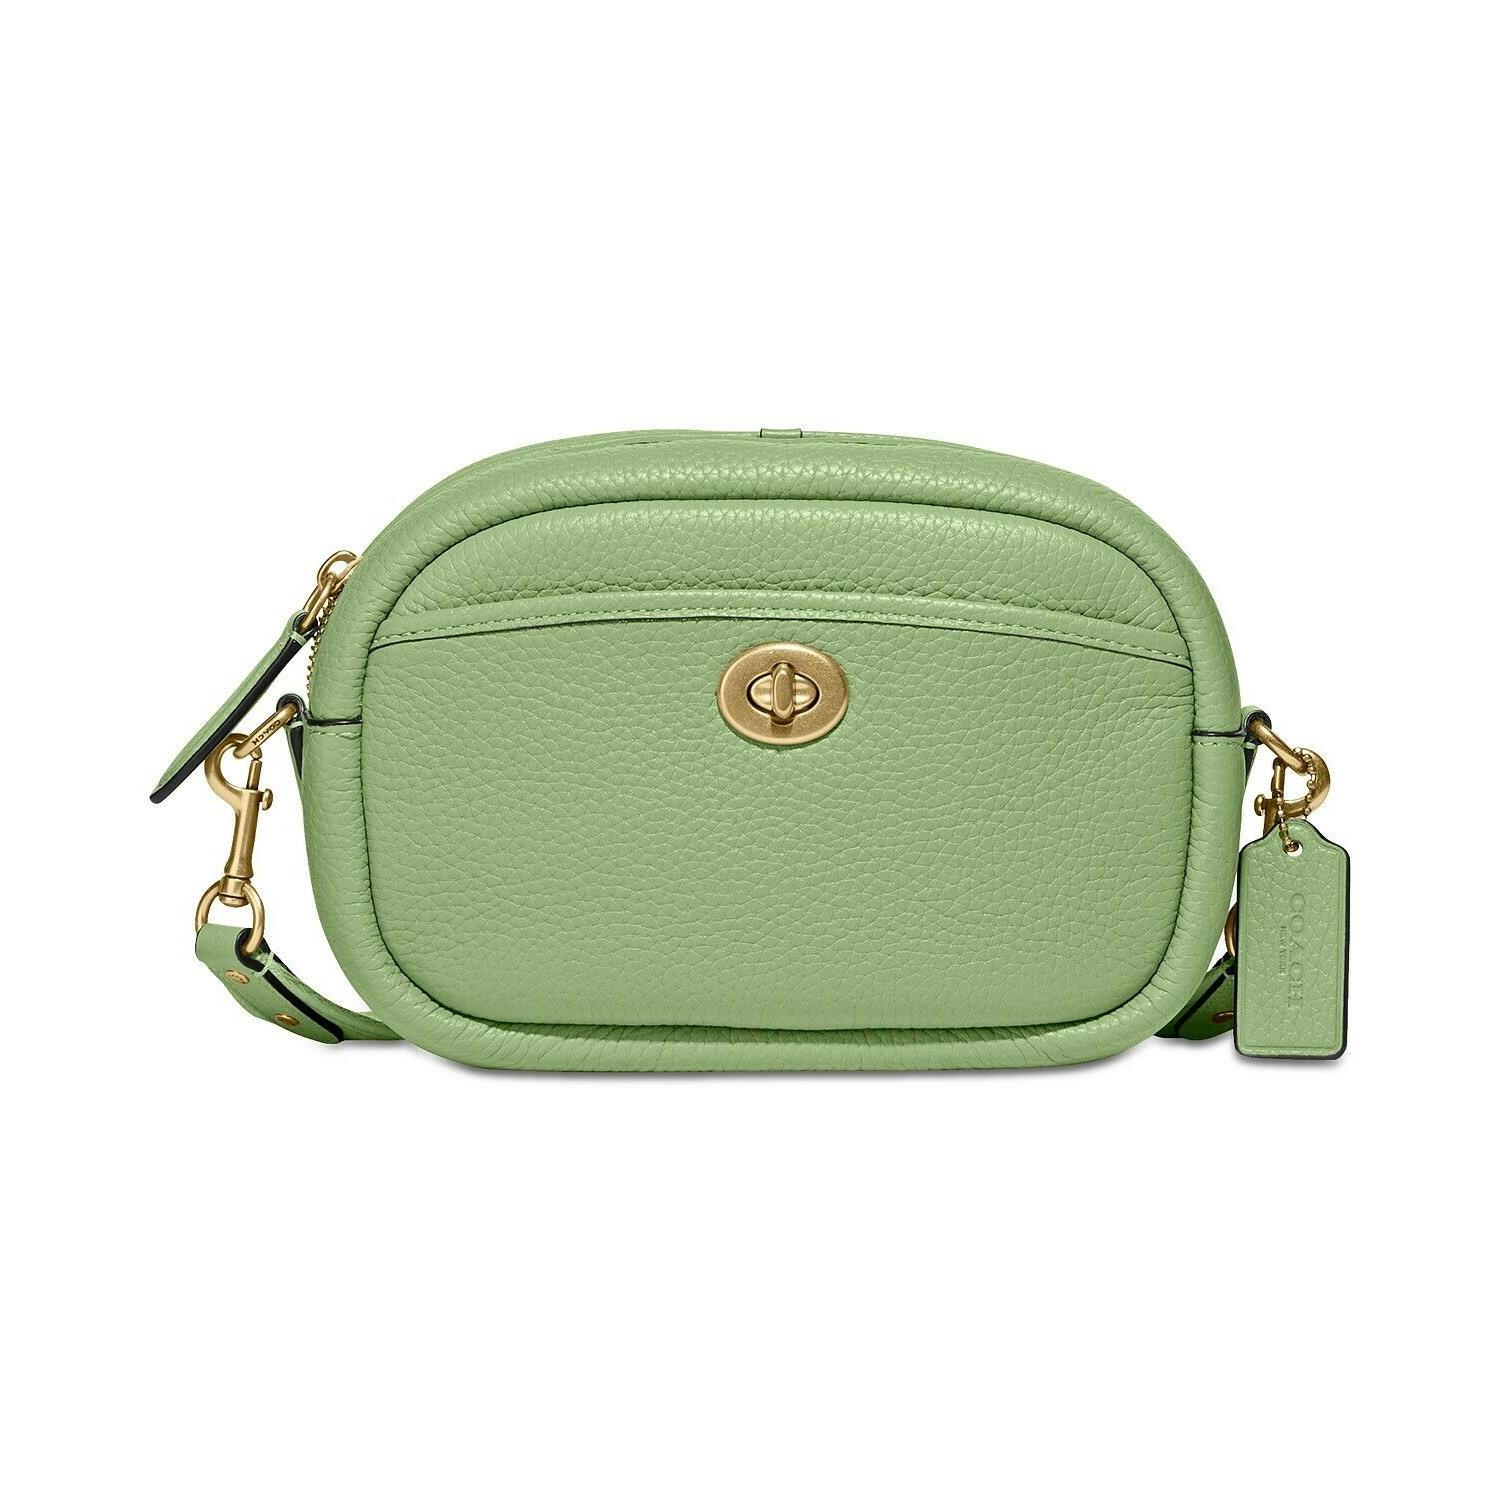 Coach Leather Camera Bag Pale Pistachio Packaging